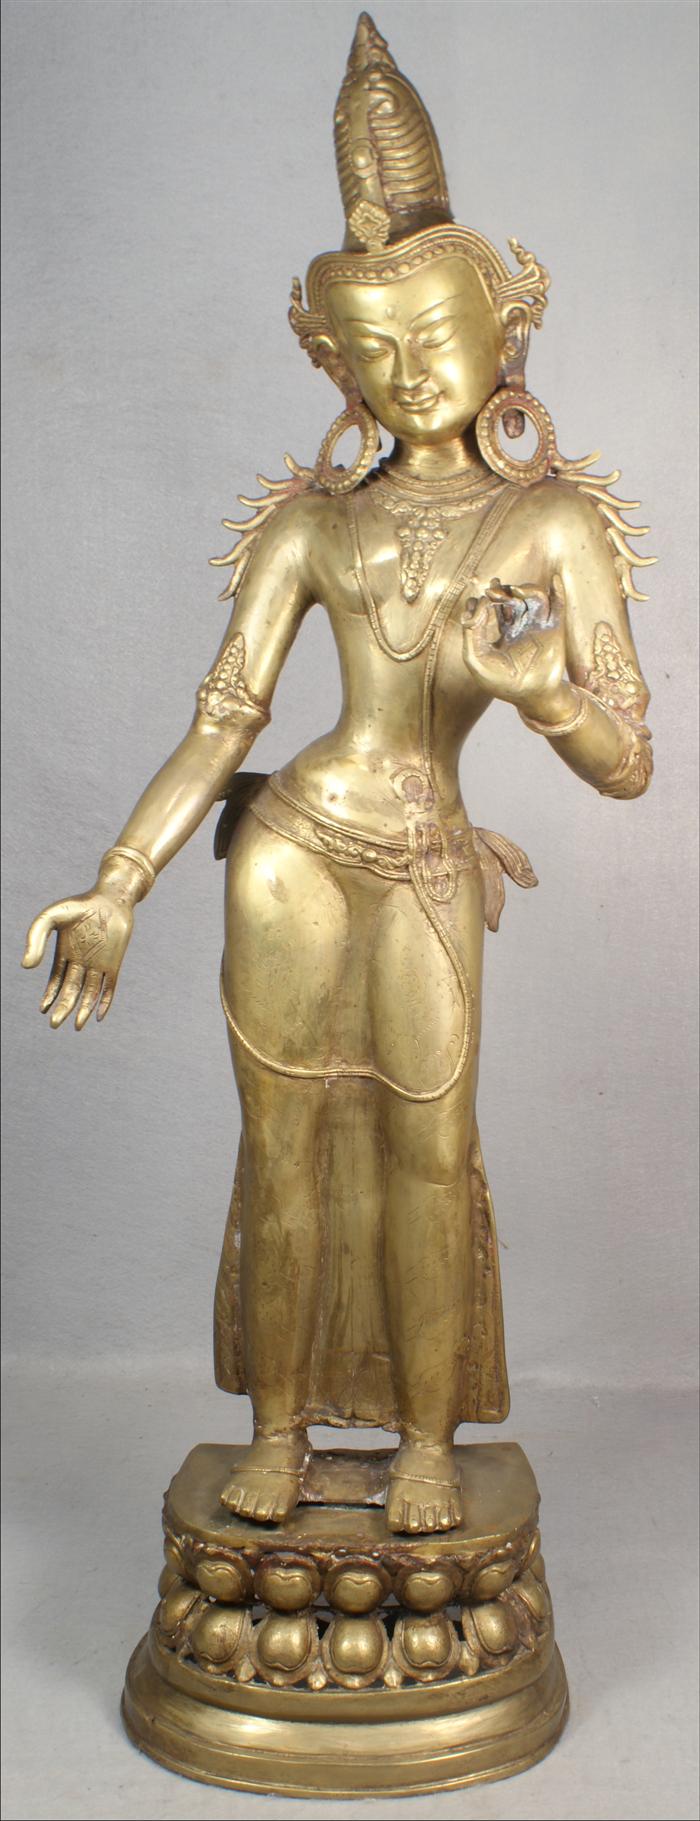 Indian brass figure, 34" h, 20th